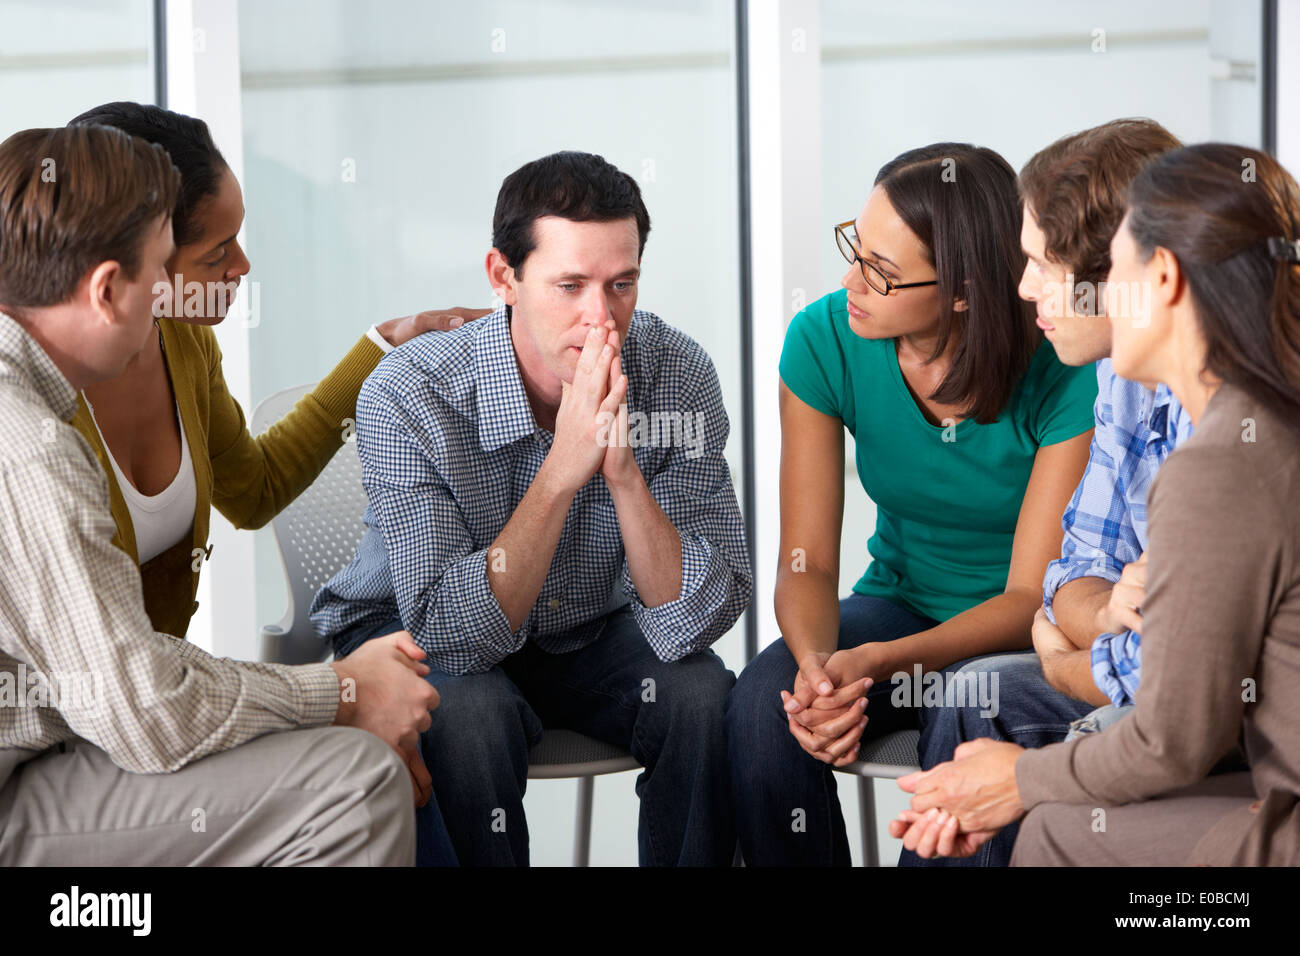 A support group closely circled around a man with his hands pressed to his nose and mouth, palms touching.  He looks sad and the 5 people around him look supportive.